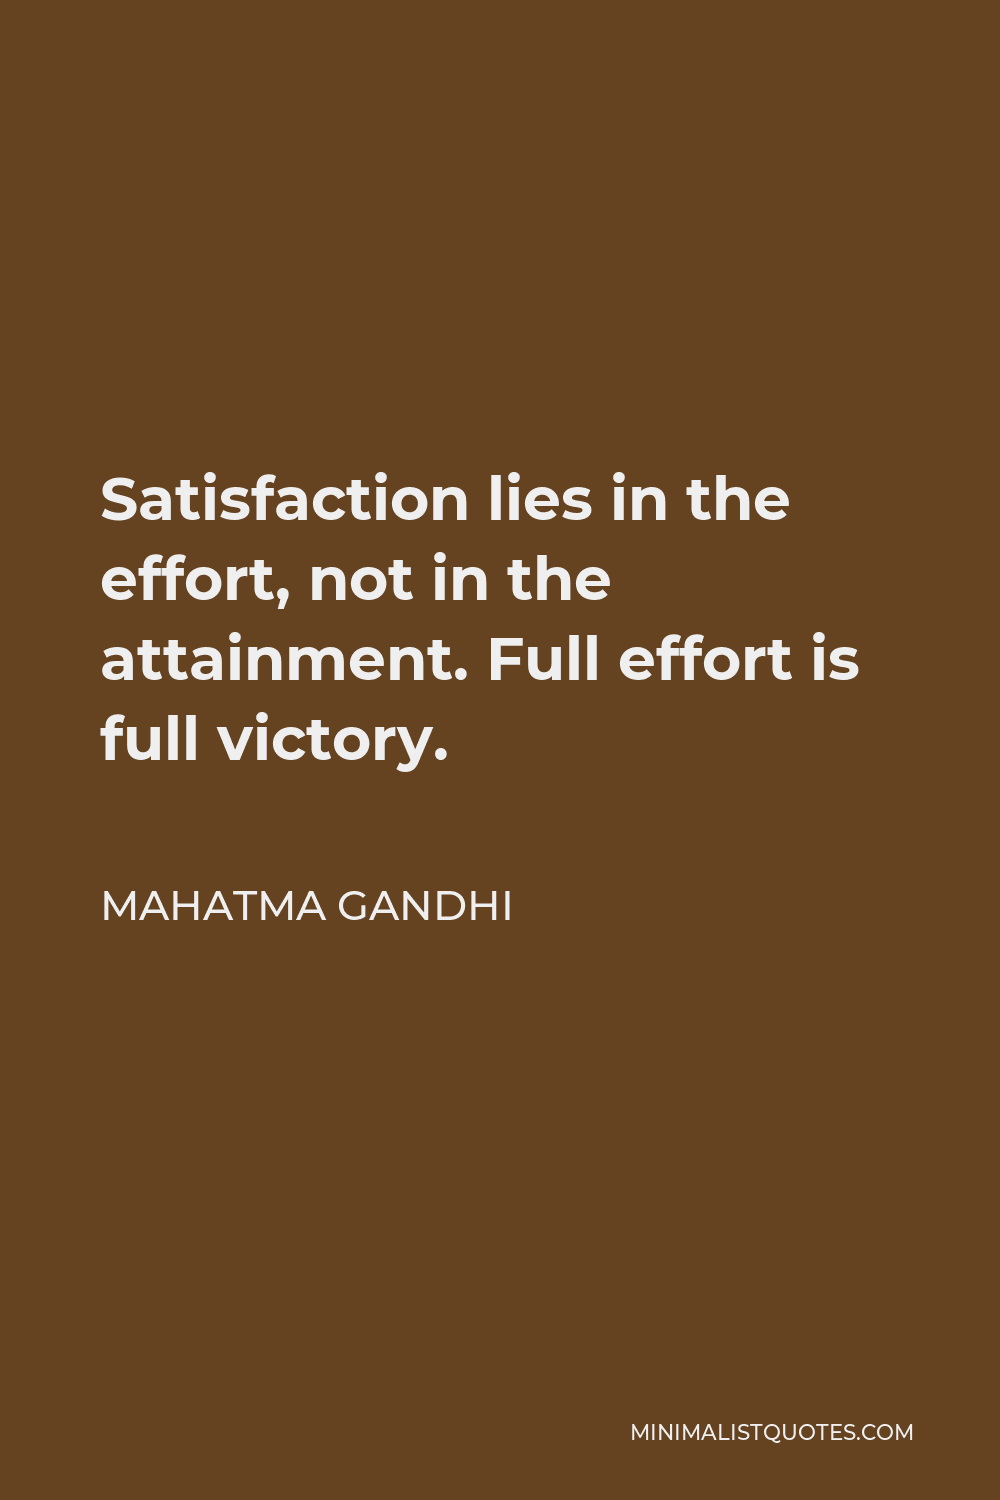 Mahatma Gandhi Quote - Satisfaction lies in the effort, not in the attainment. Full effort is full victory.